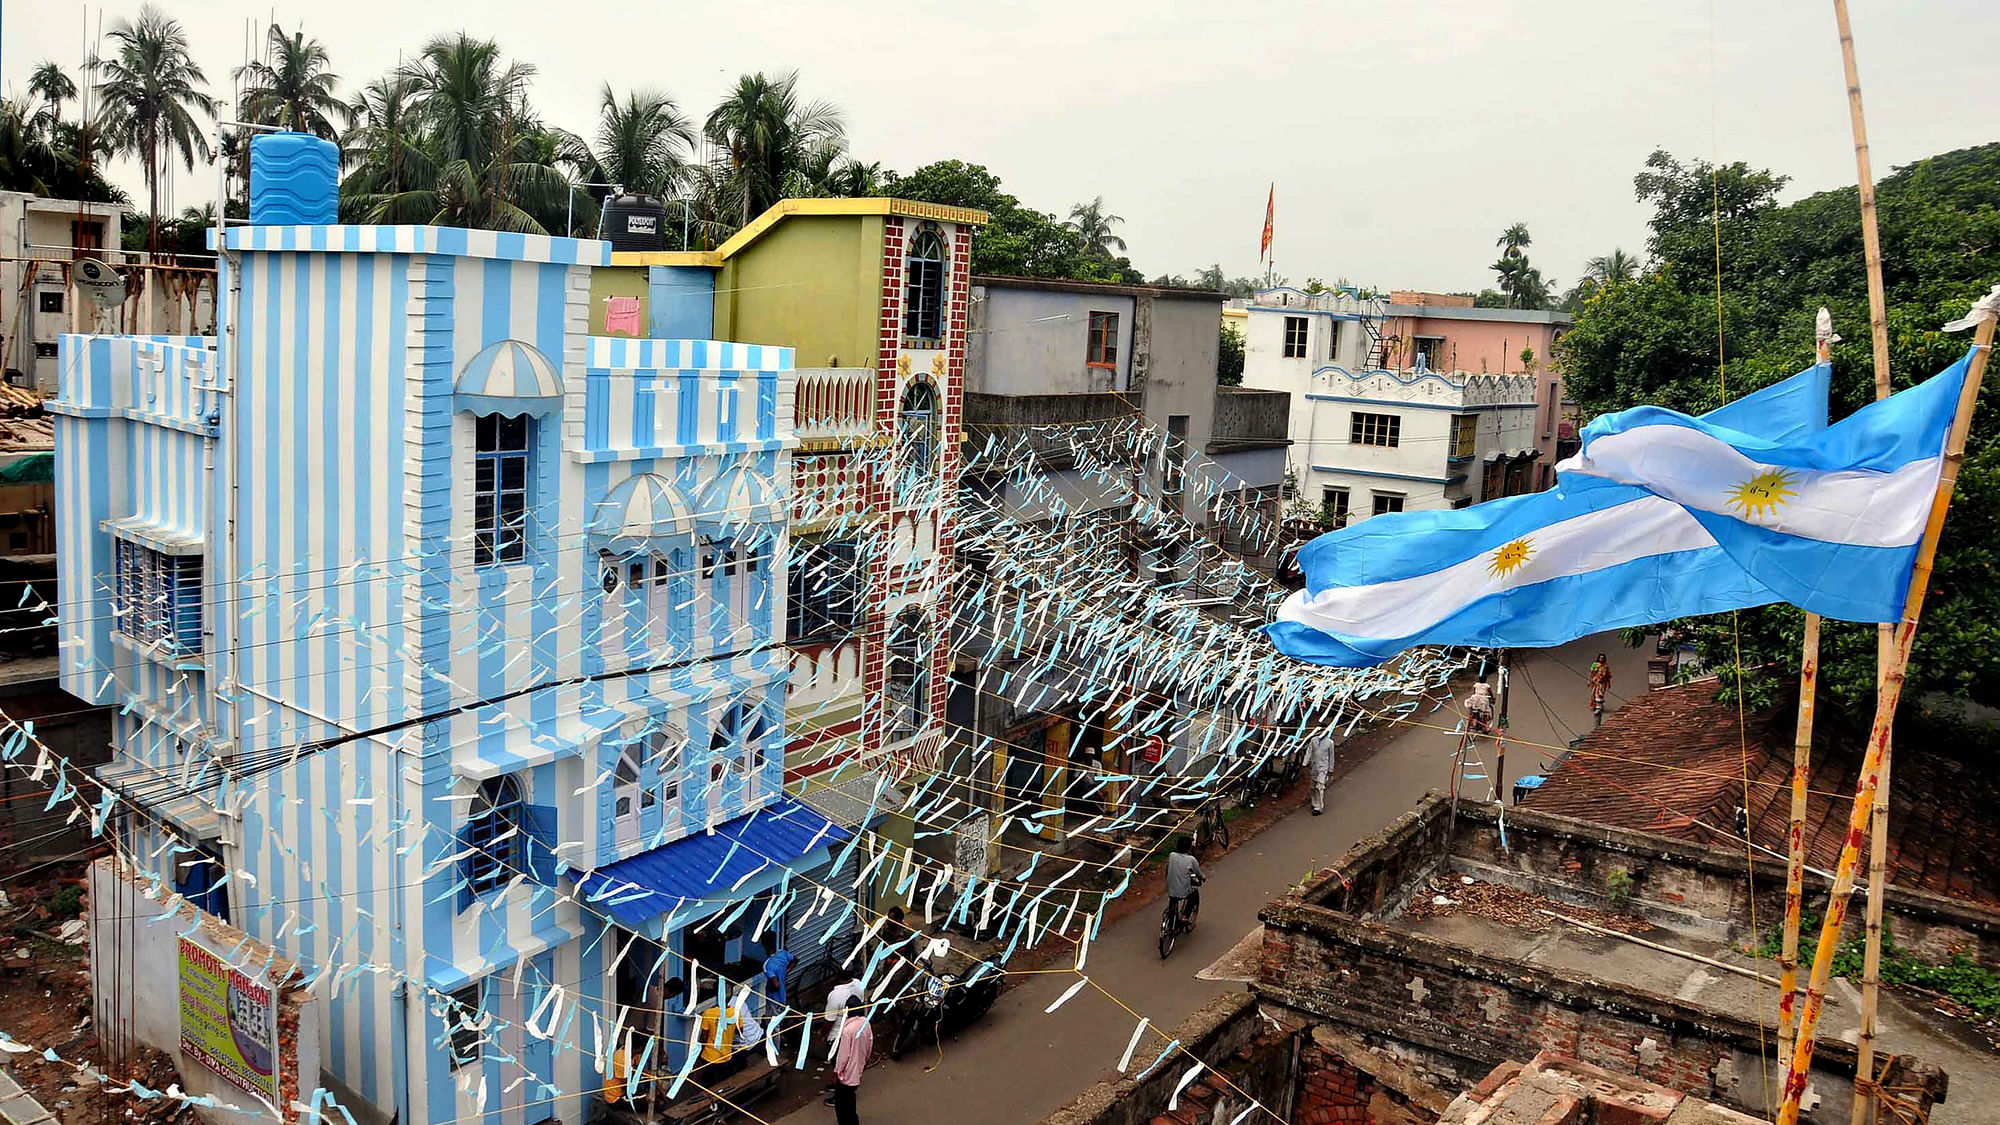 A view of tea-seller and die-hard Lionel Messi fan, Shib Shankar Patras three-storeyed apartment painted in blue-and-white ahead of FIFA World Cup 2018.